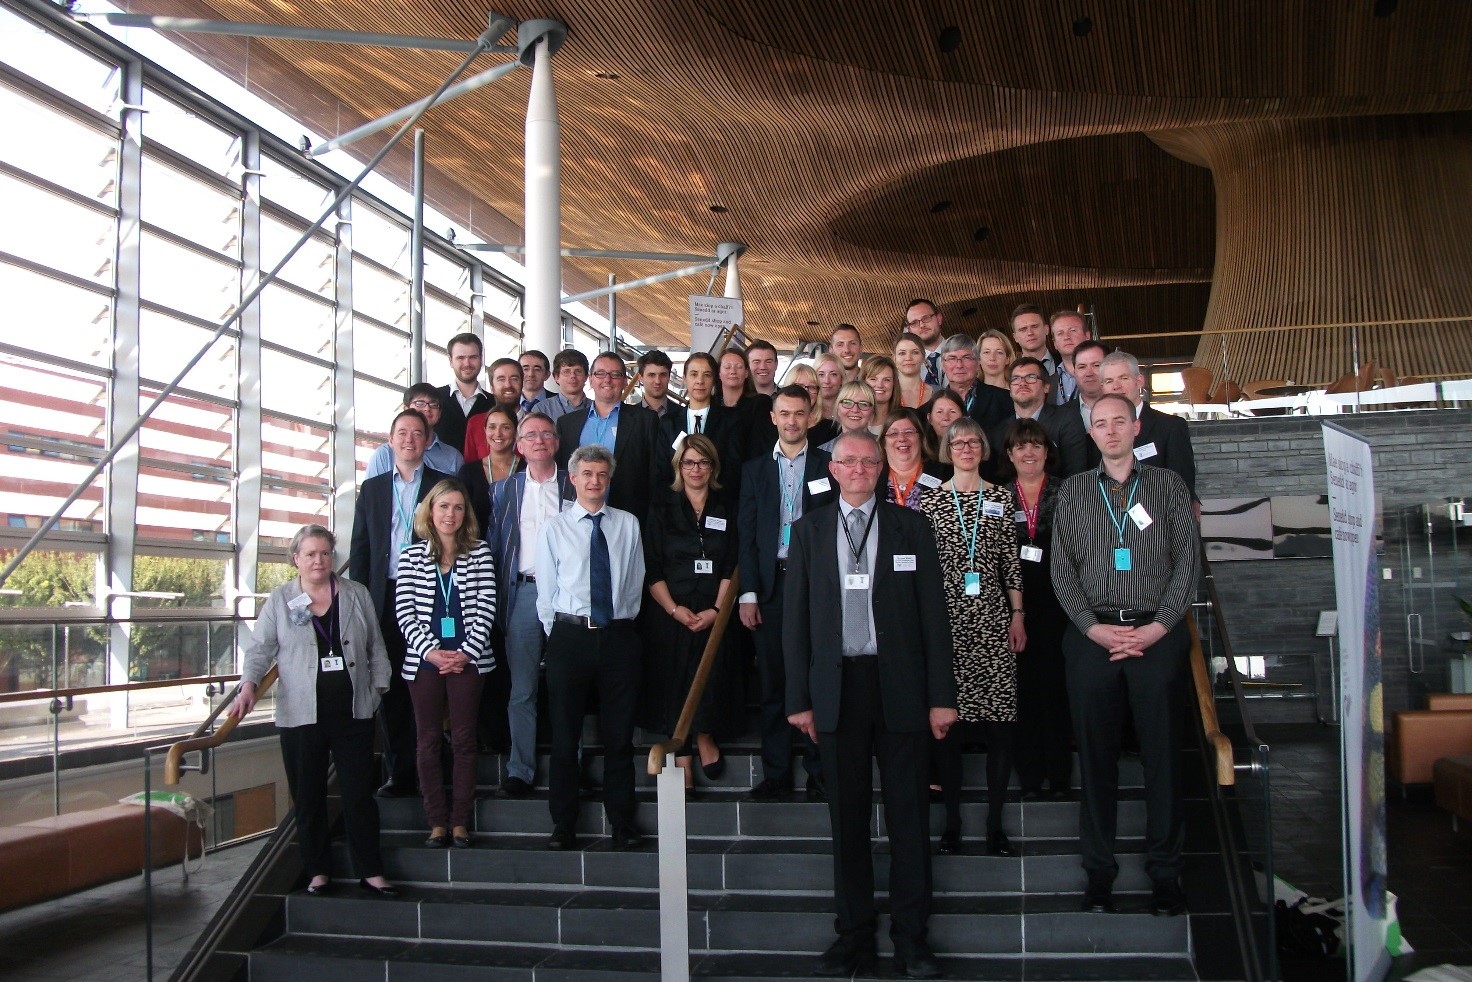 Image of delegates at the inter-parliamentary researchers’ and librarians’ conference gathered at the National Assembly for Wales